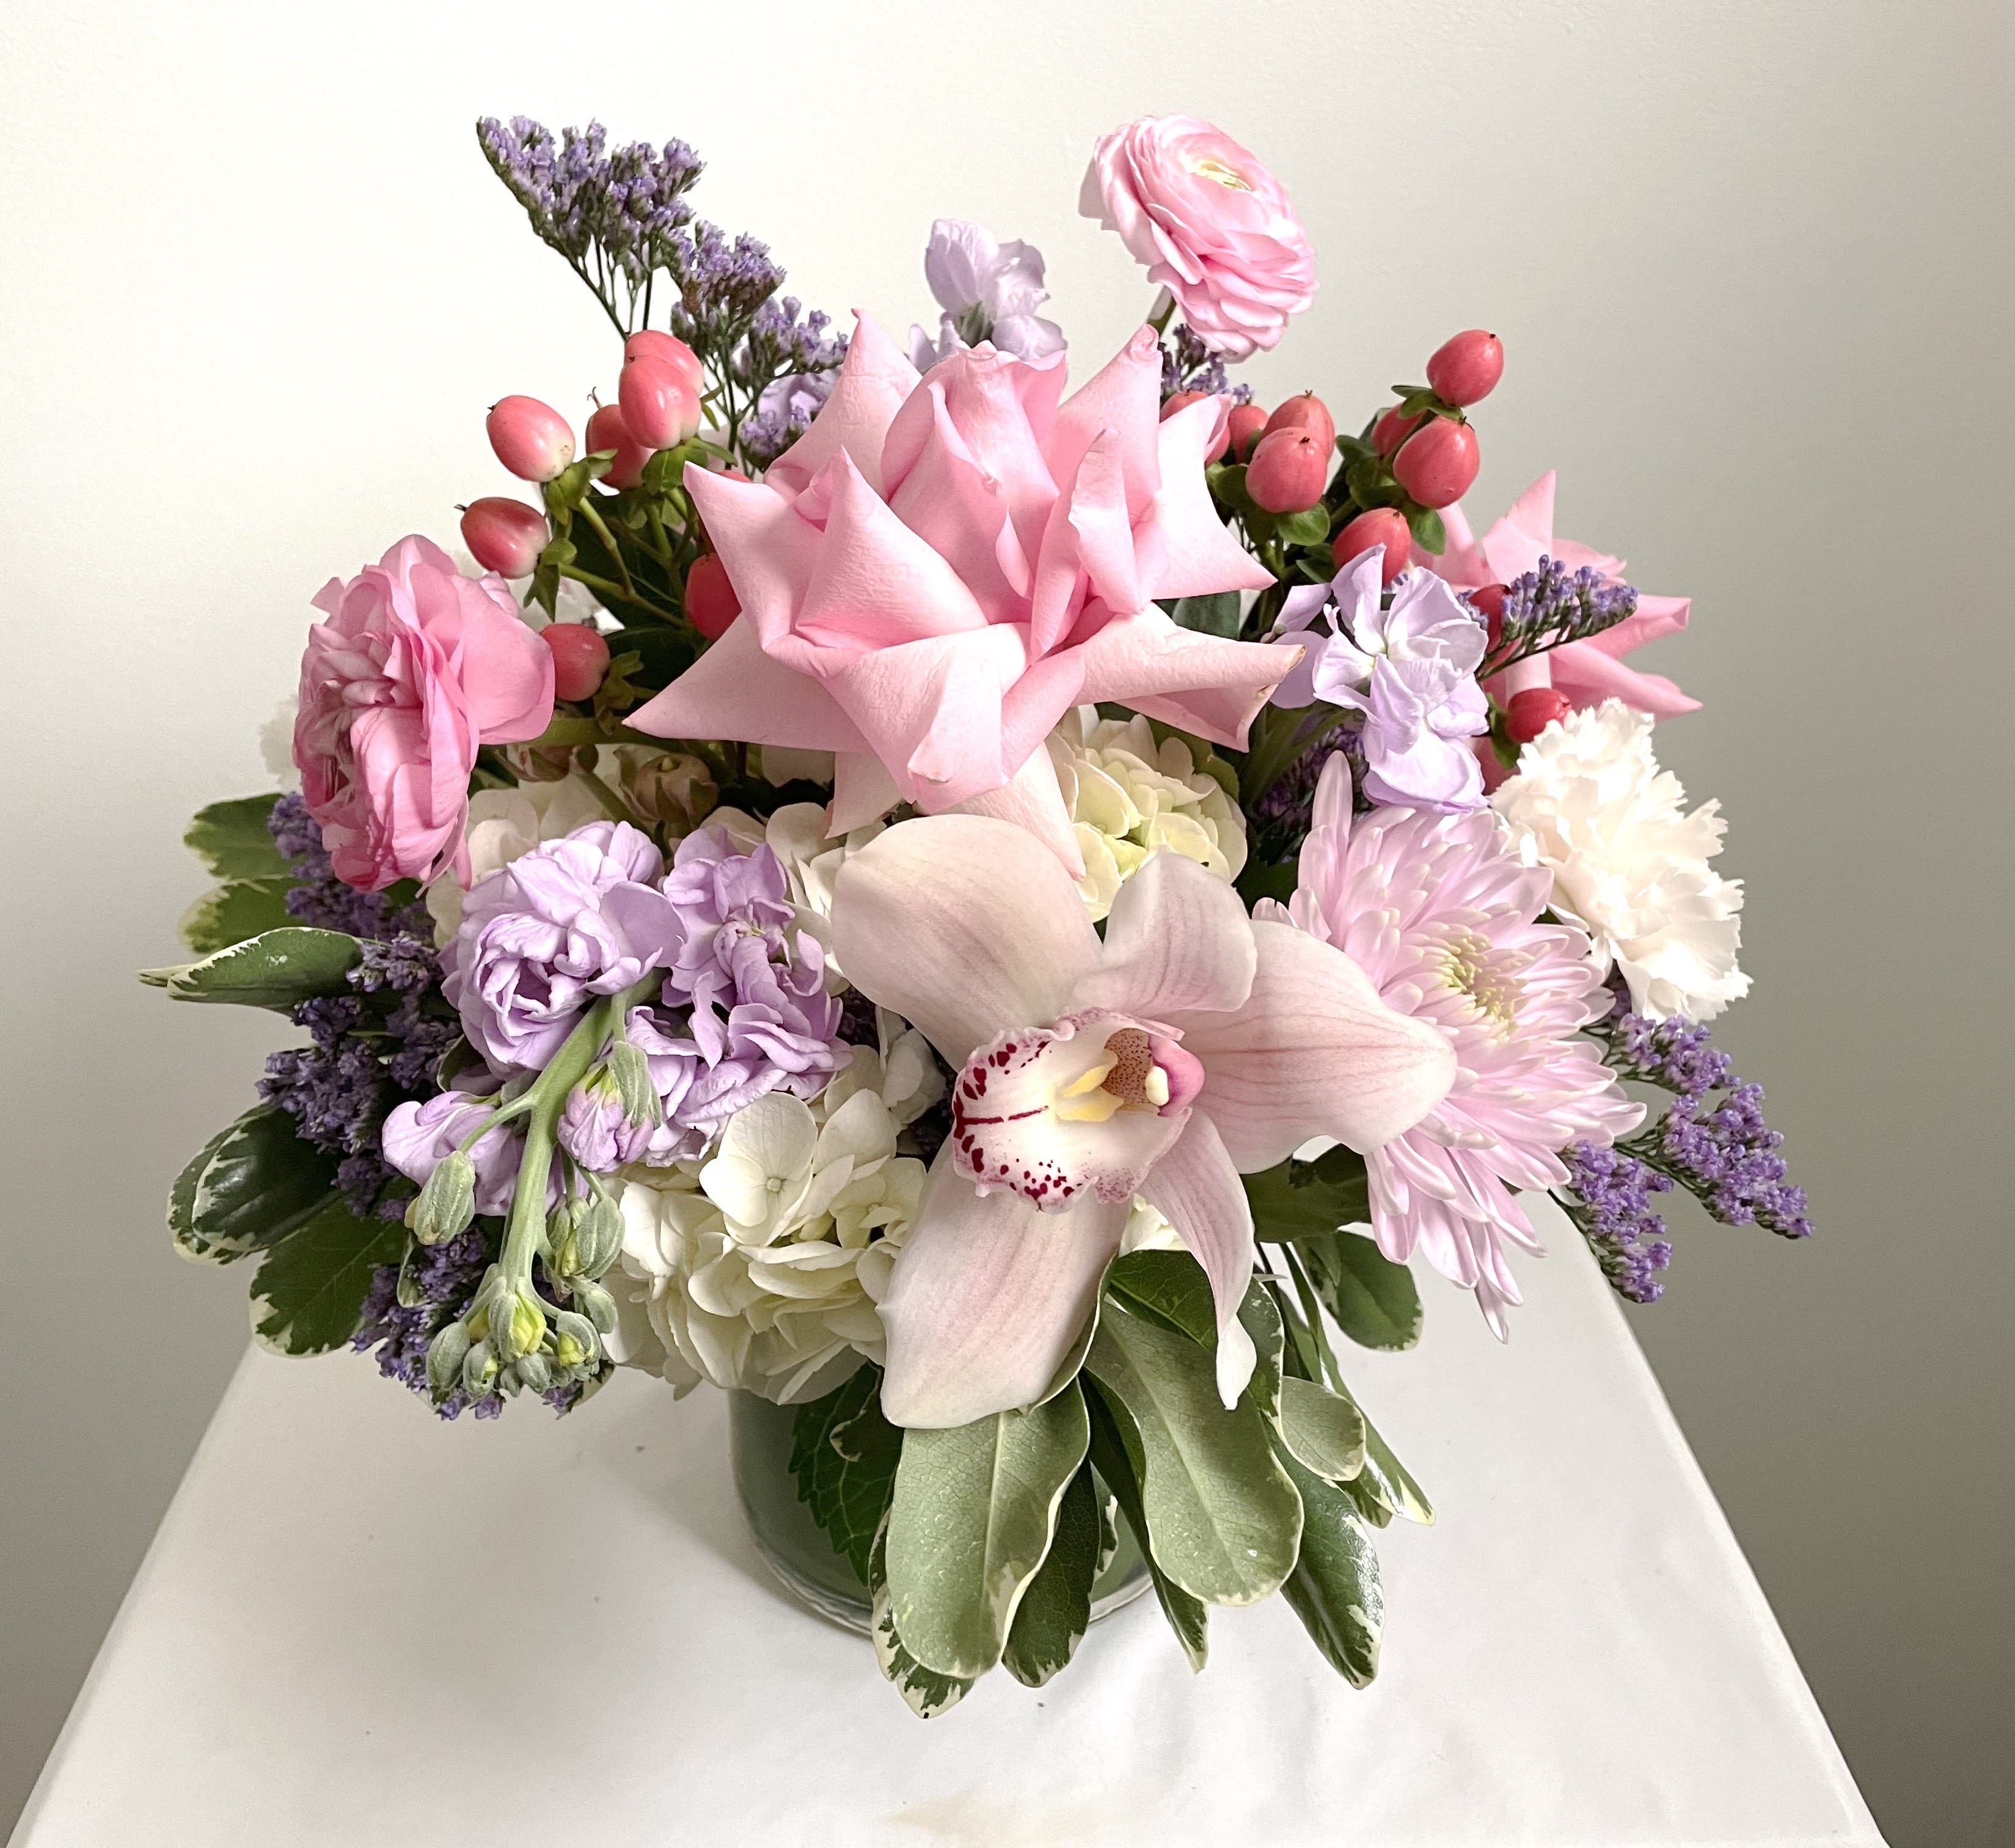 Mommy Dearest  - For the more complicated relationships.....impress your Mother with our Mommy Dearest Arrangement! With soft pink and purple flowers arranged in a glass cylinder vase with a ti leaf wrap.     Delivery Info- We make all of our deliveries after 1pm every day. If the weather is very cold, we prefer not to leave the flowers outside. Please let the recipient know that they should expect delivery.